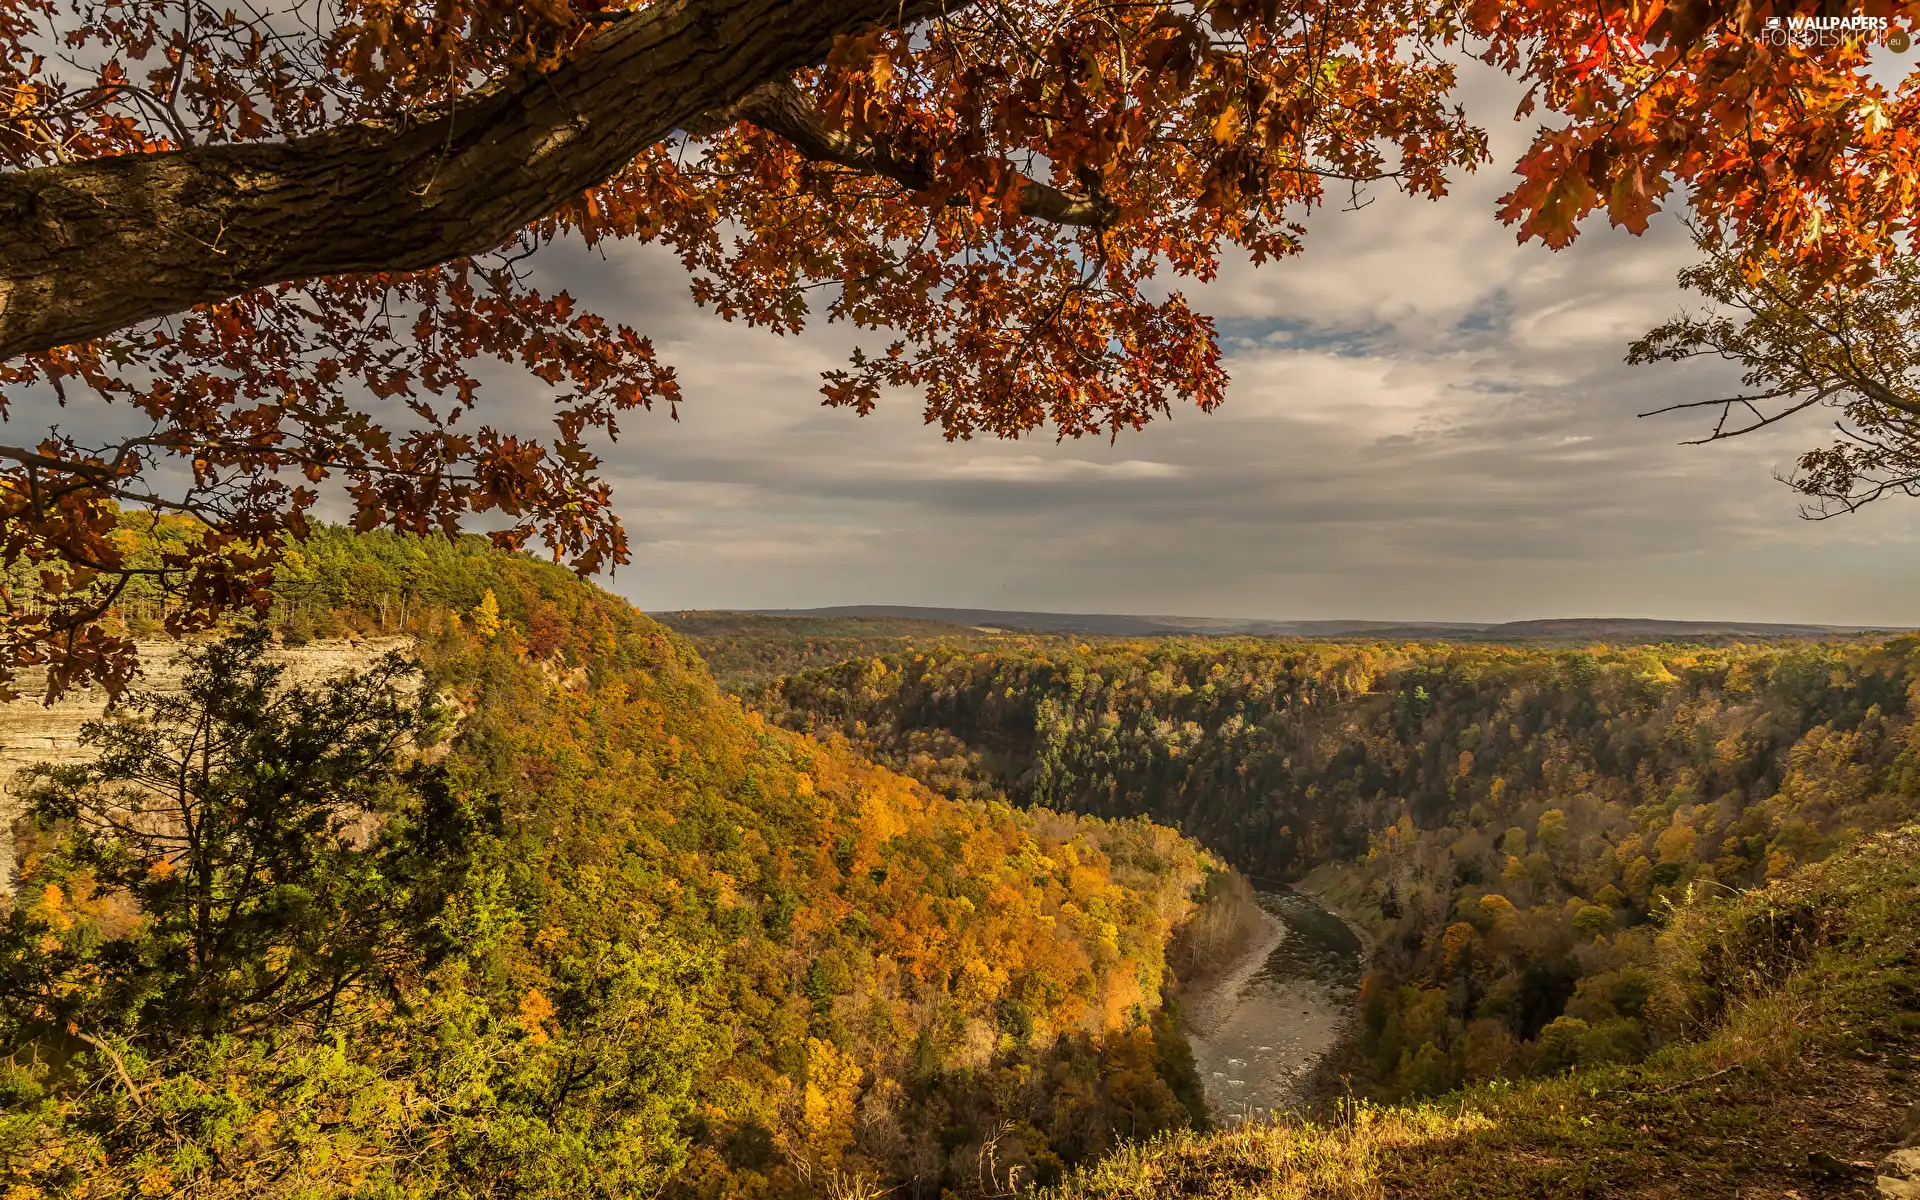 Mountains, woods, clouds, trees, branch pics, River, autumn, viewes